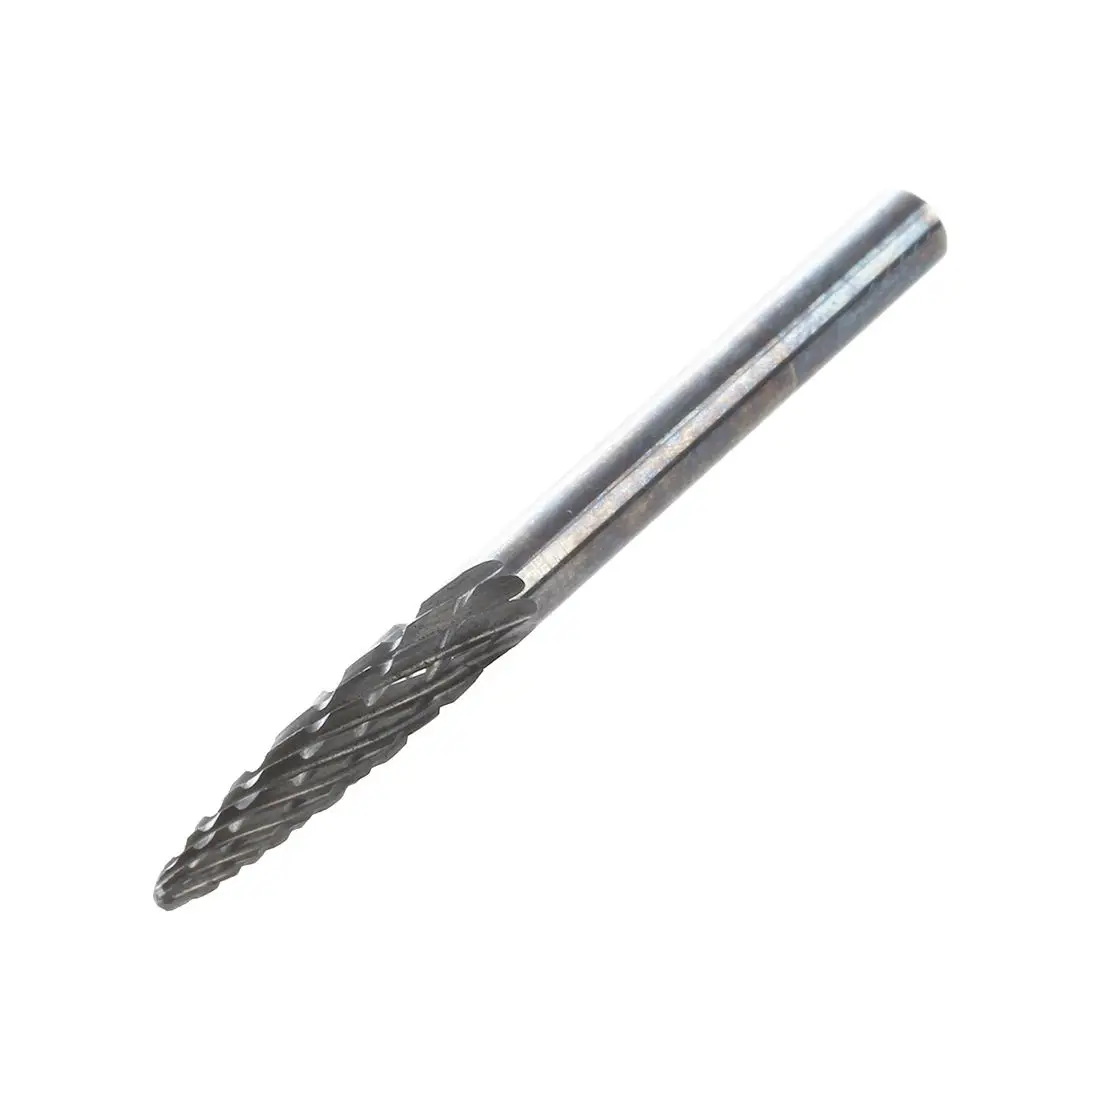 

Double conical tungsten carbide burrs cut 3mm diameter of the head